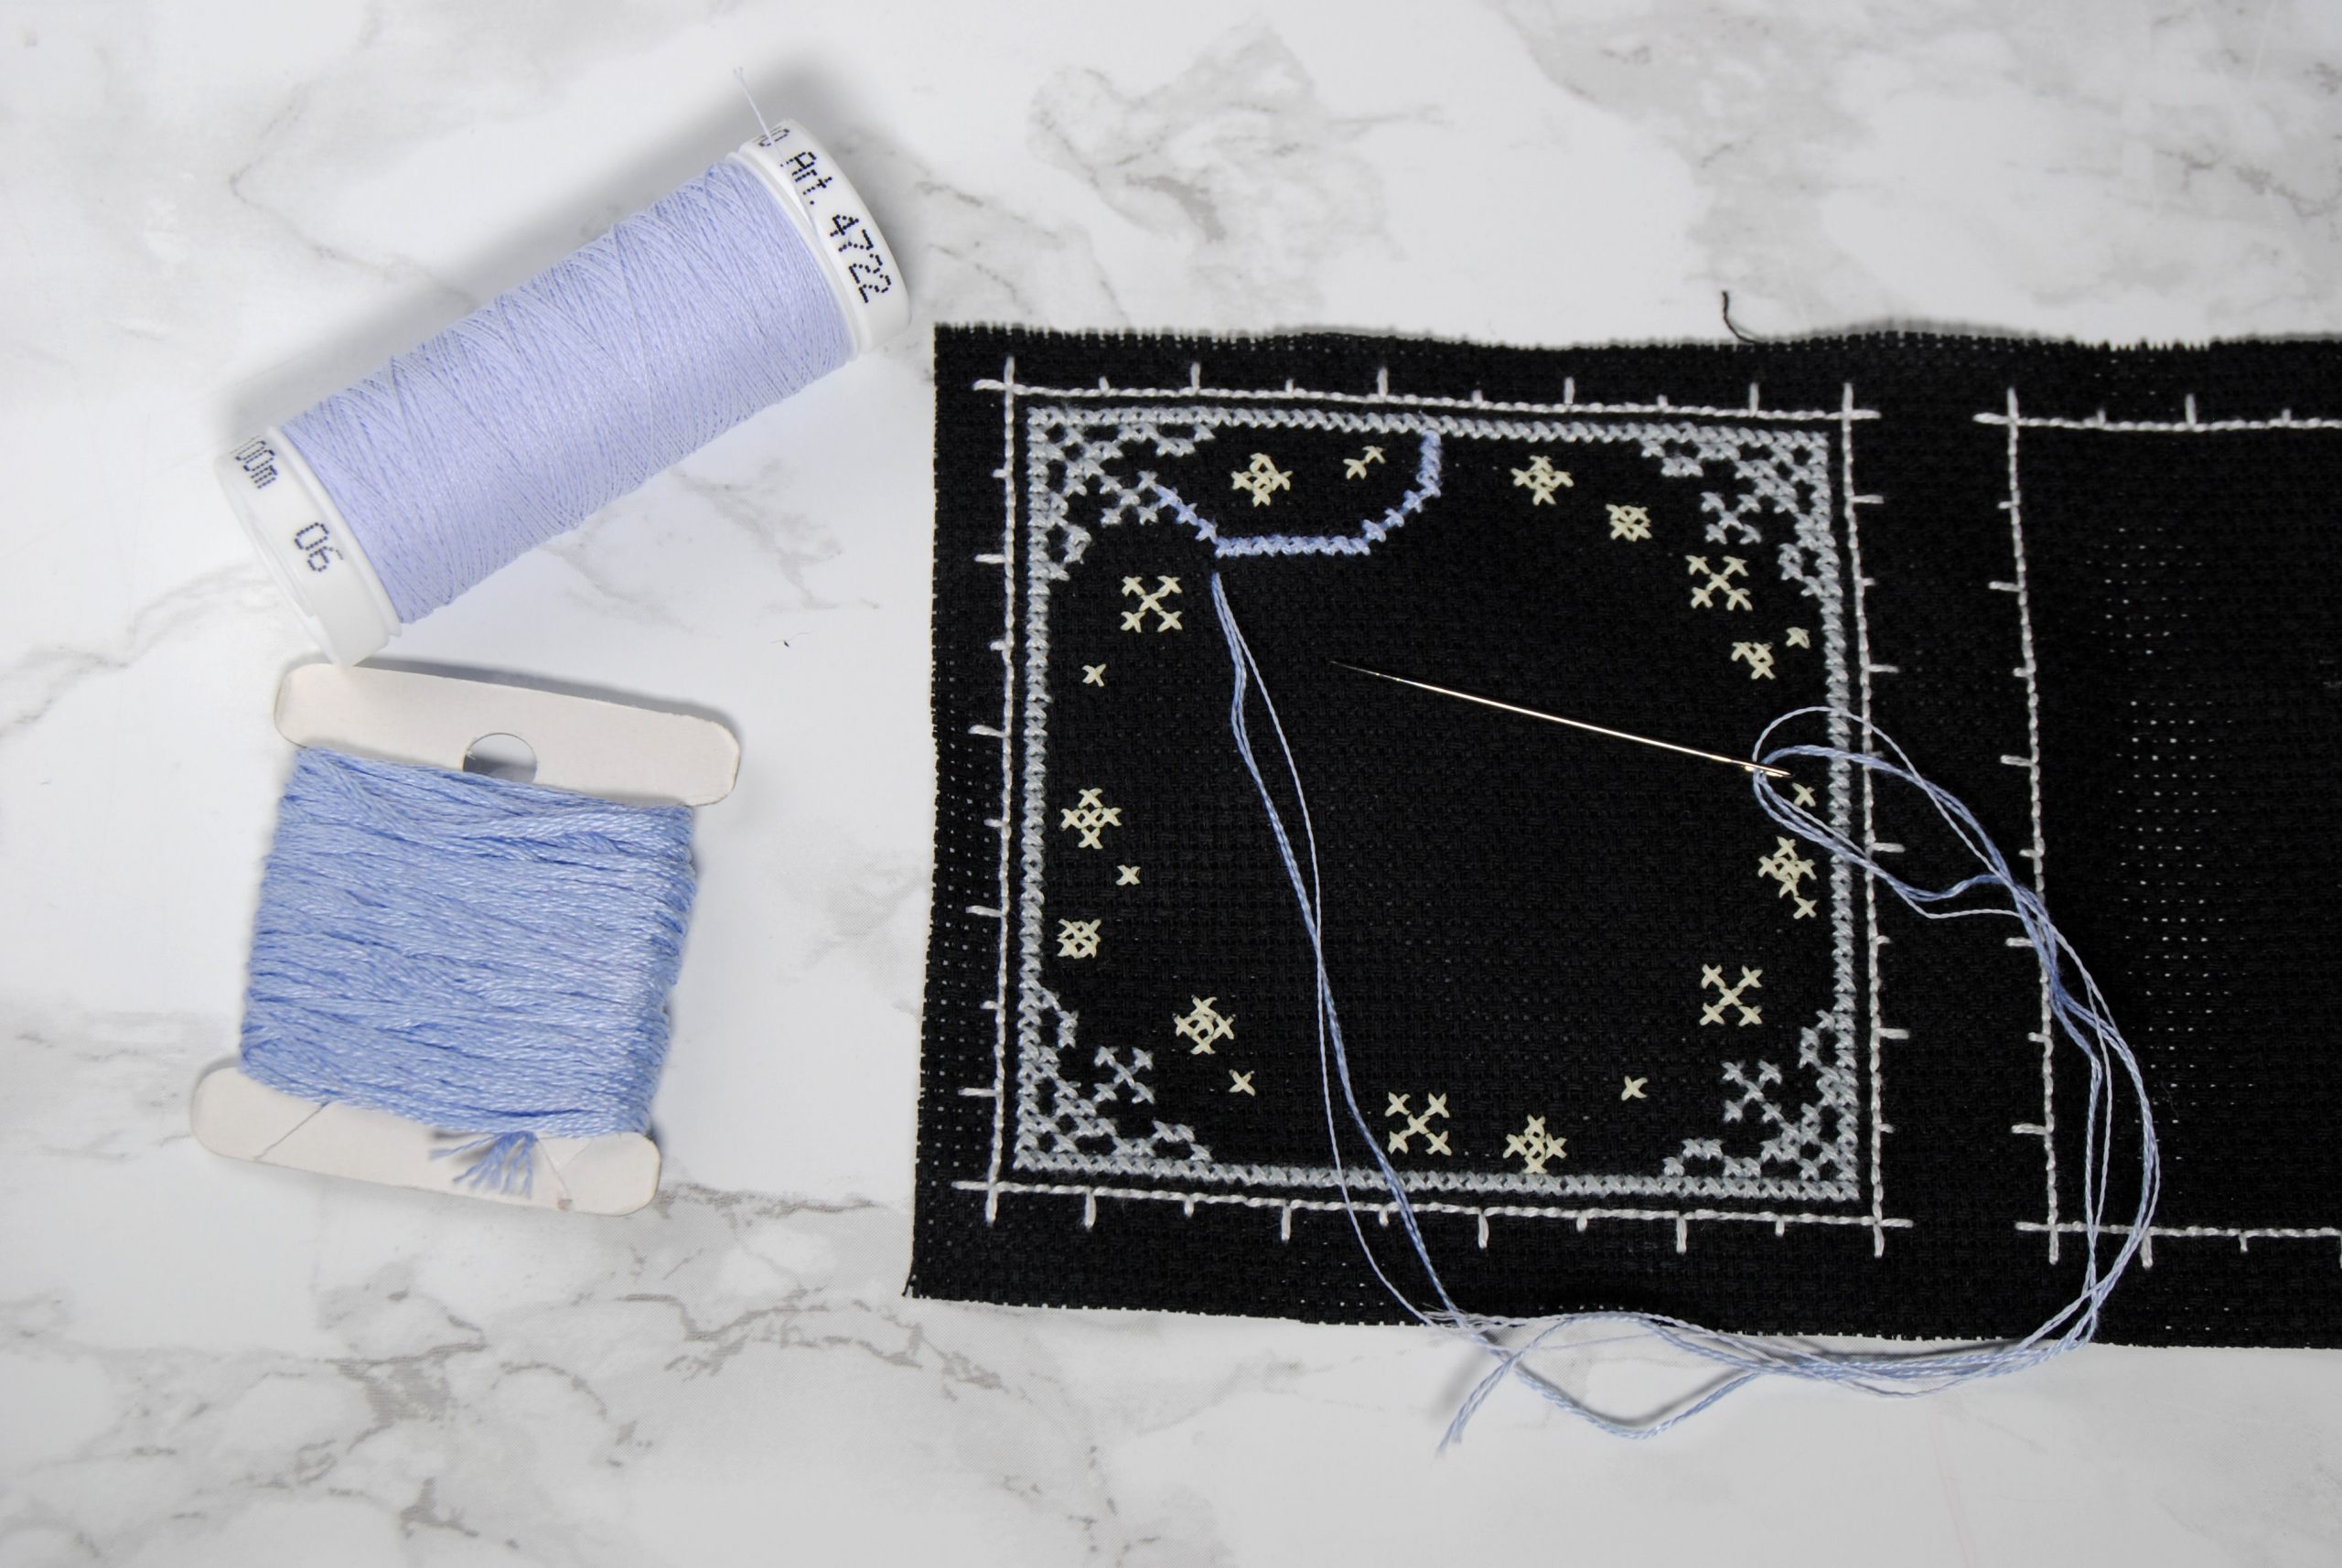 Glow in the Dark Cross Stitch Threads - How and Why to Use Them ⋆